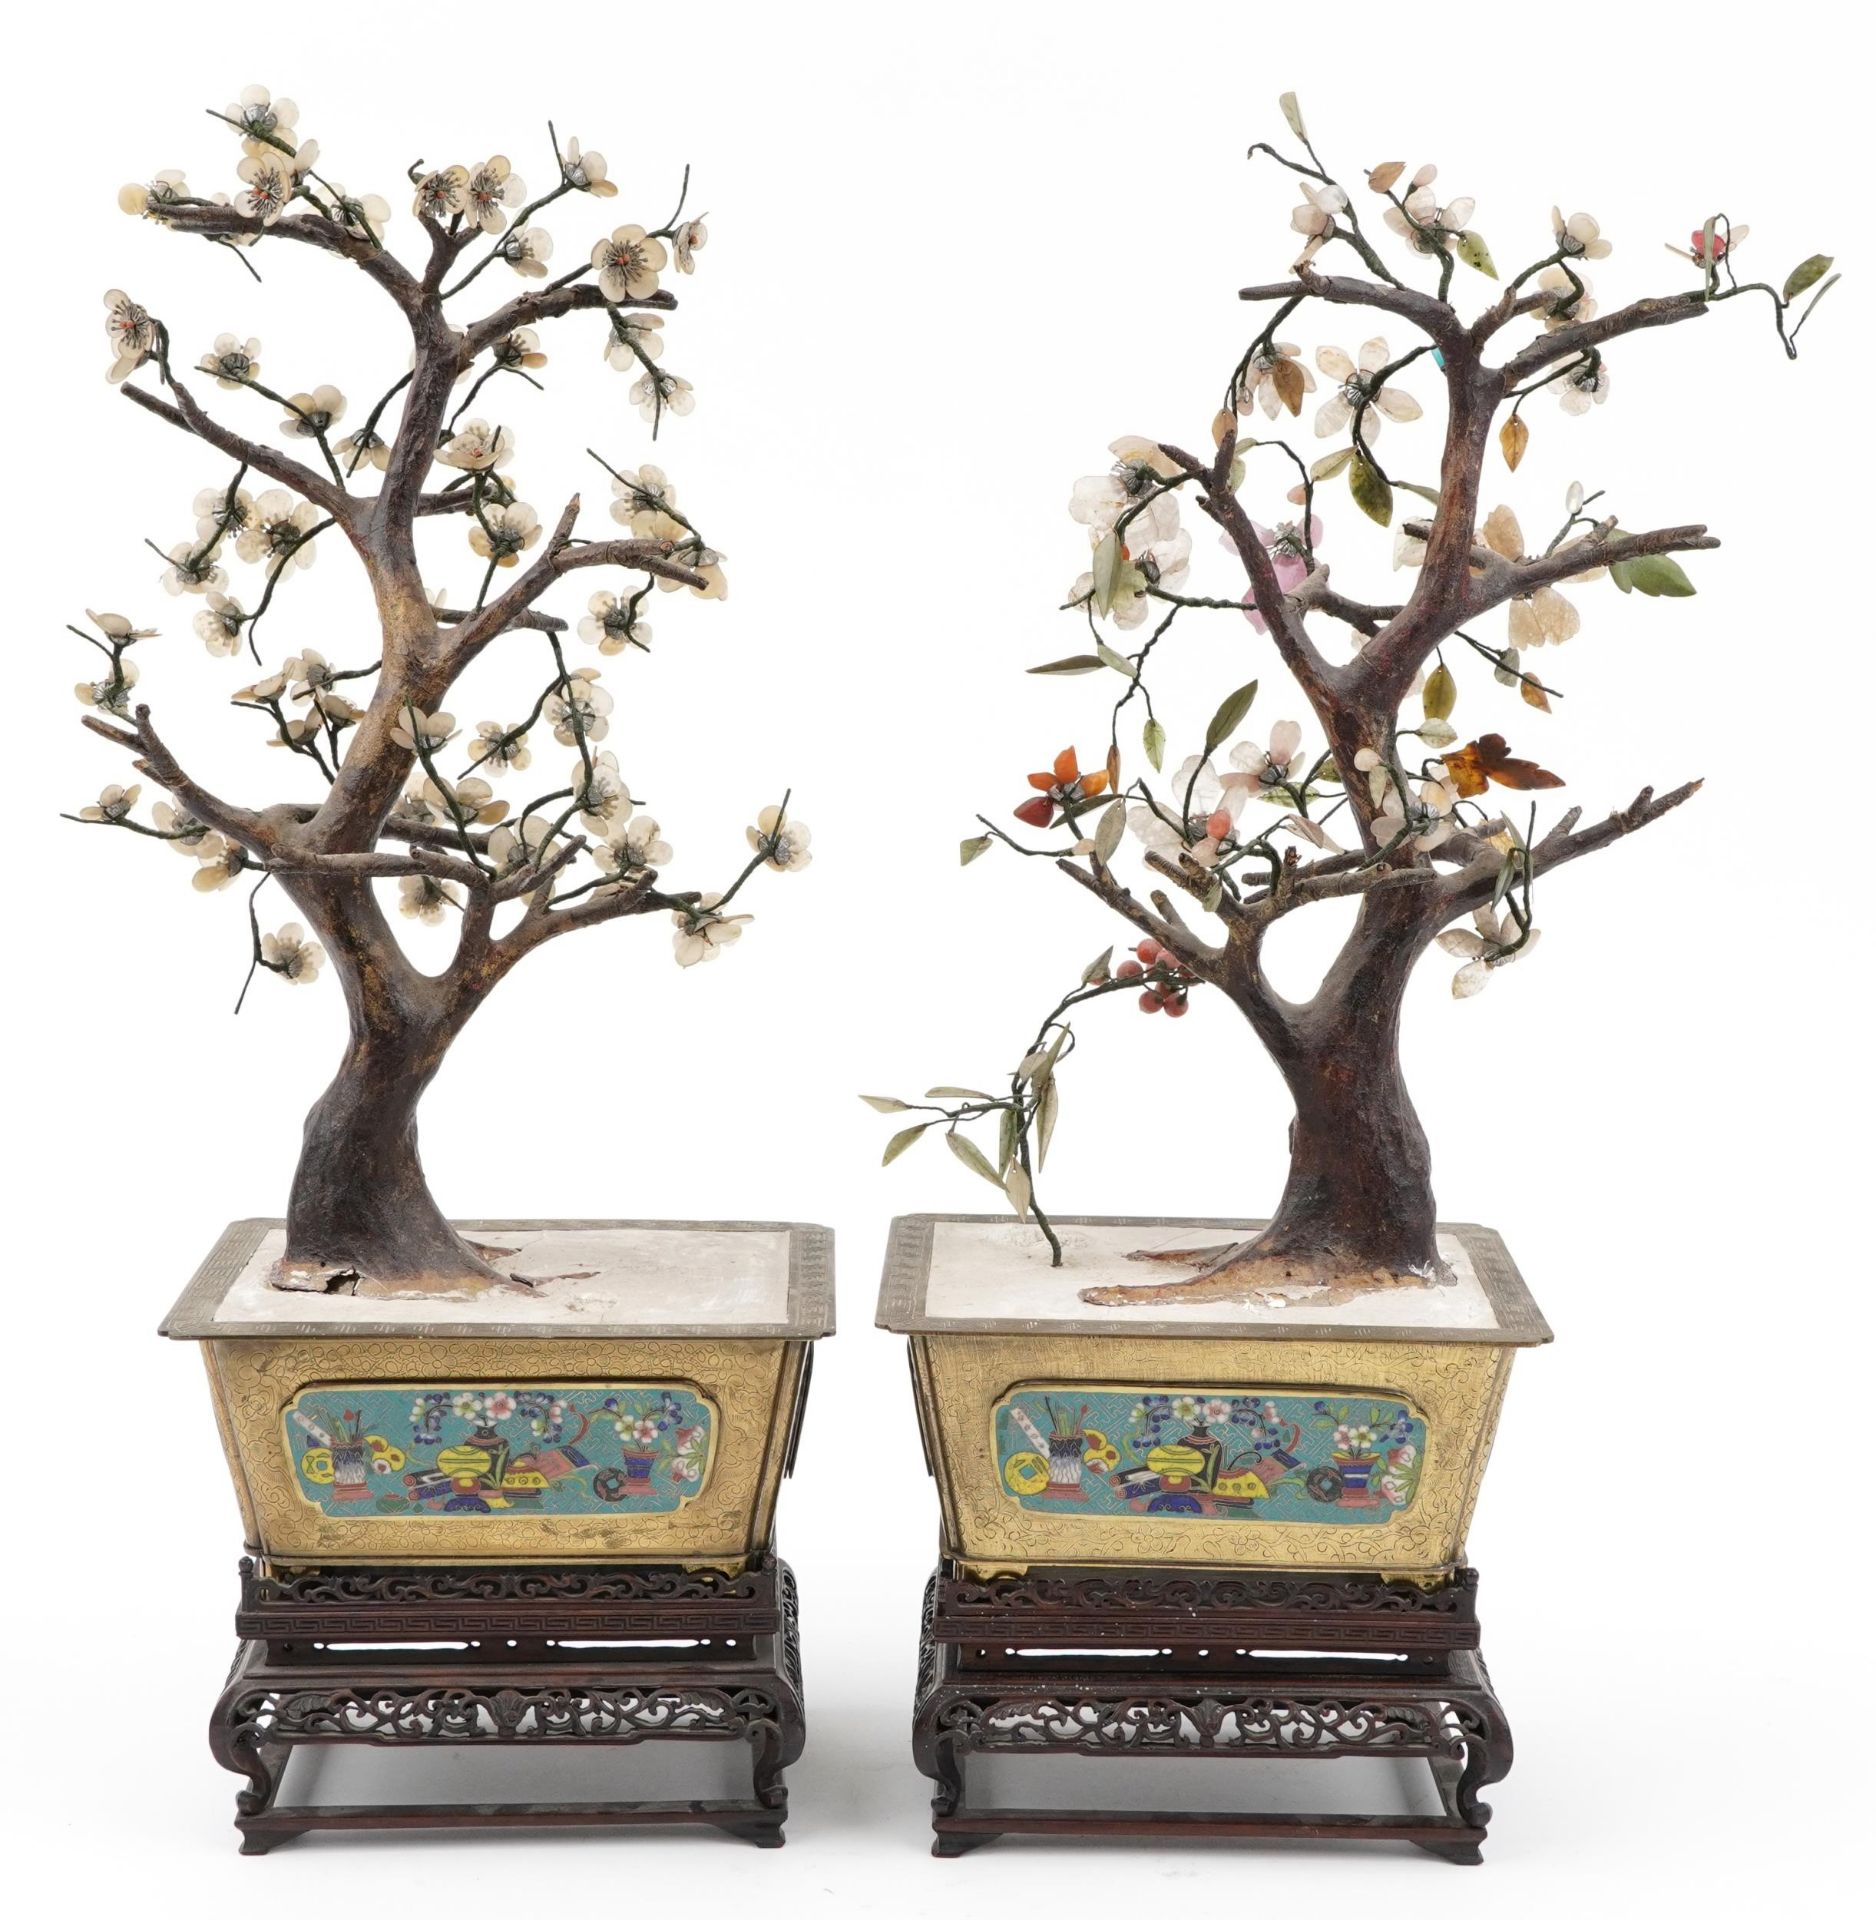 Good pair of Chinese hardstone bonsai trees housed in engraved brass planters with cloisonne - Image 2 of 6